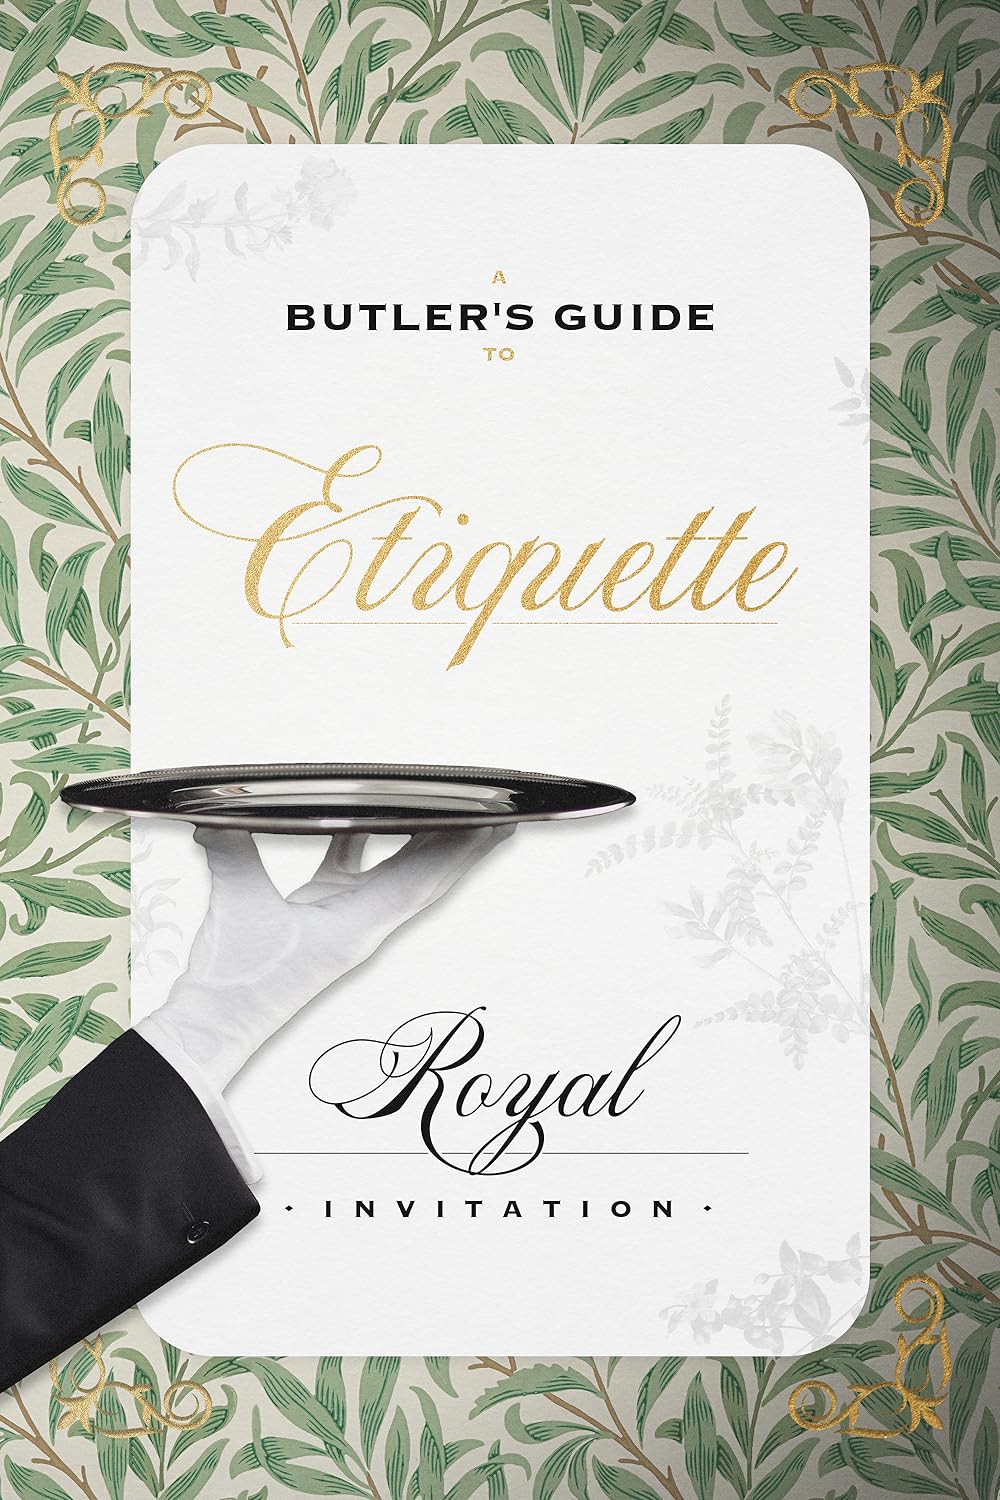 A Butler's Guide to Royal Etiquette - Receiving an Invitation